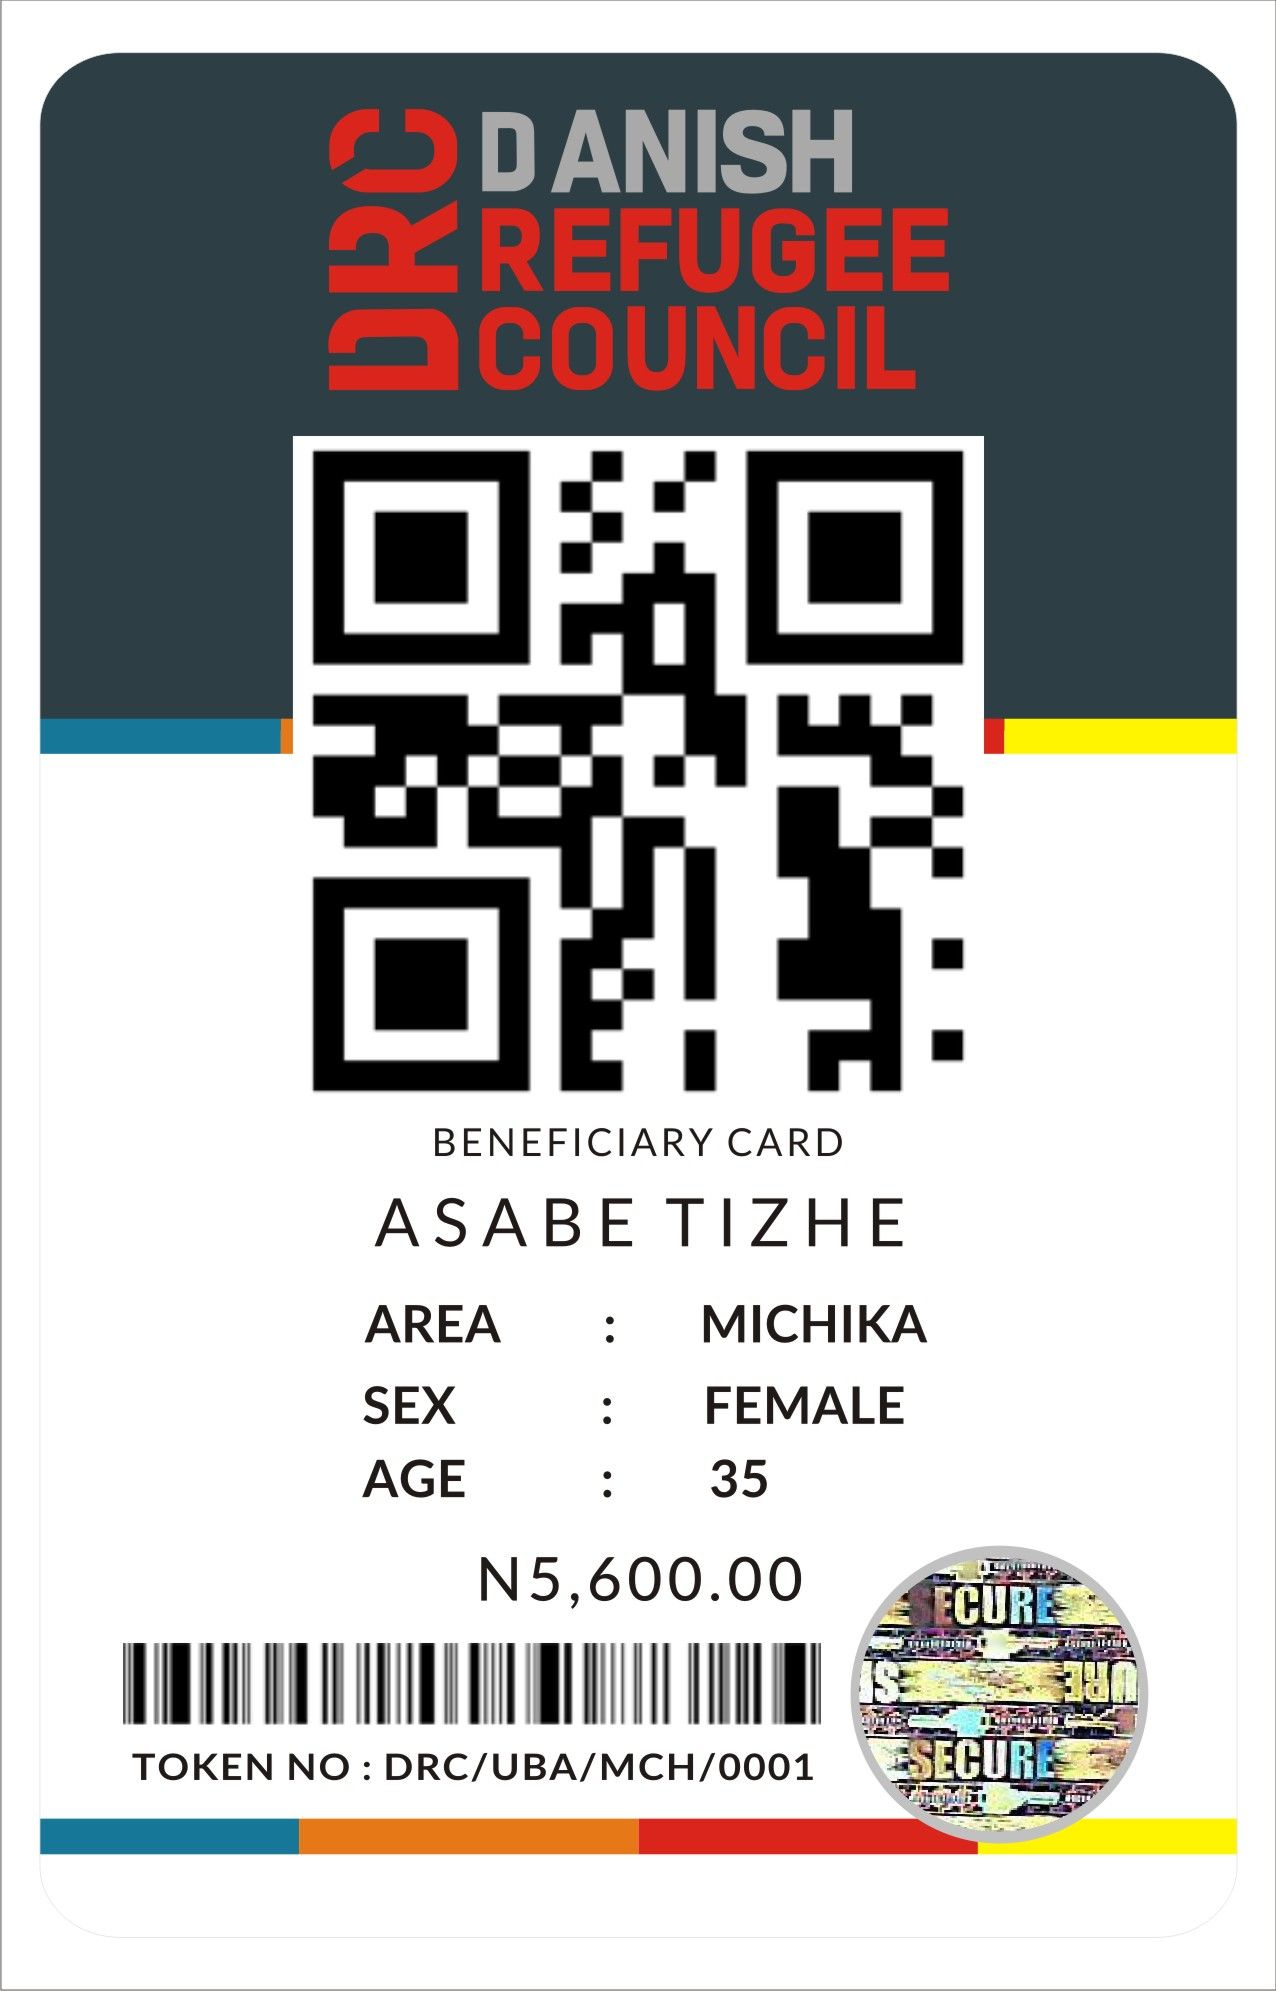 CALL CHINEDU ON 08179651585 TO PRINT BAR CODE STICKERS, QR CODE STICKERS, HOLOGRAPHIC FOIL, ETC